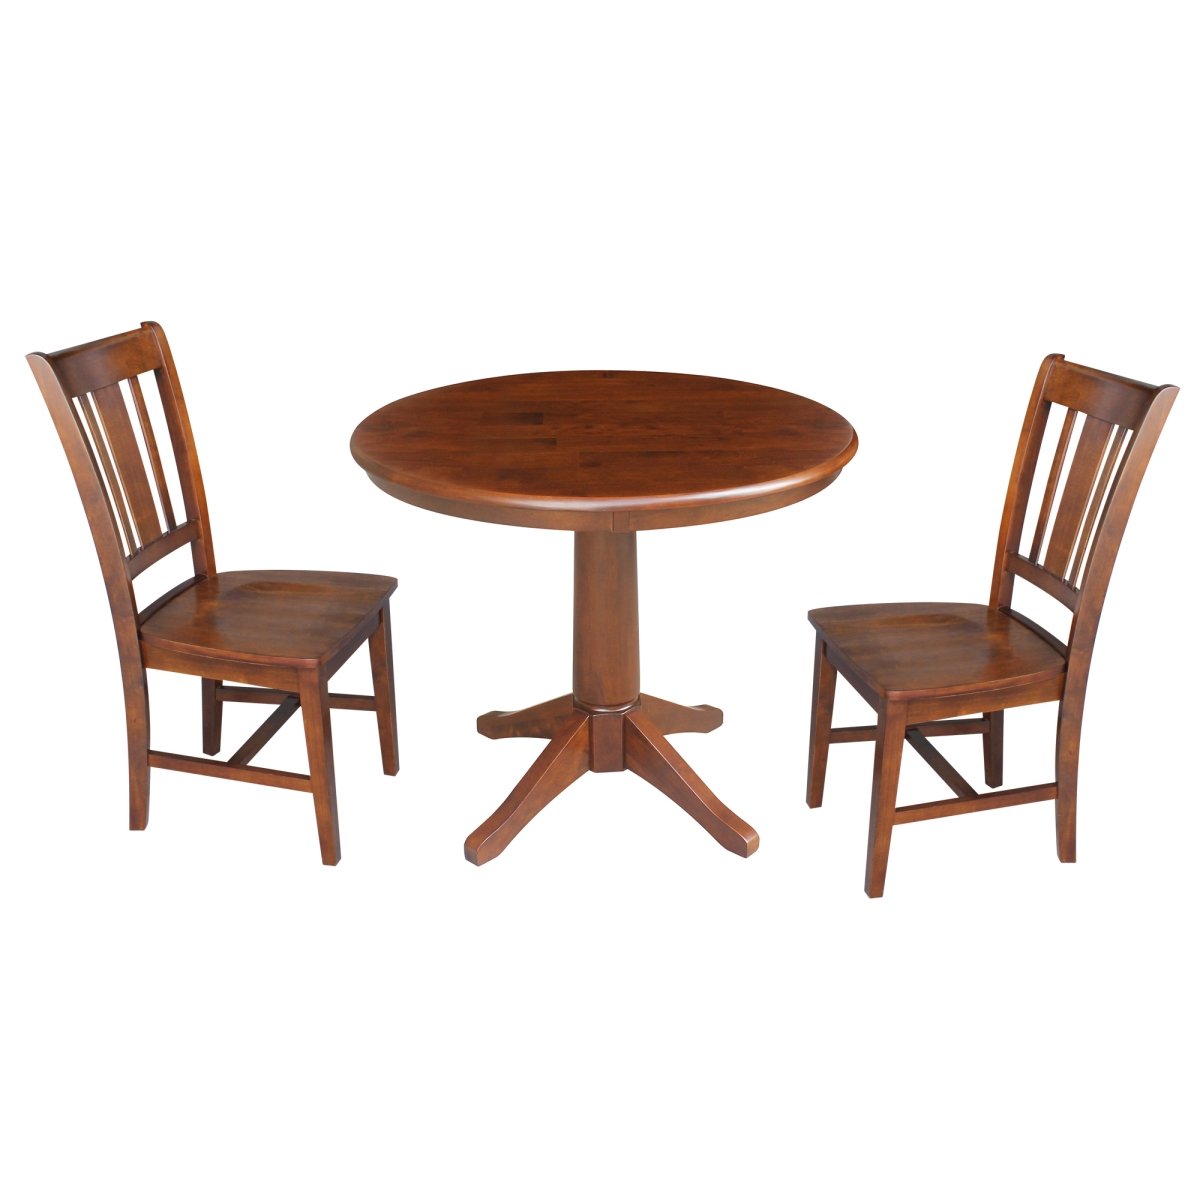 K581-36rt-27b-c10-2 36 In. Round Top Pedestal Table With 2 Chairs, Espresso - 3 Piece